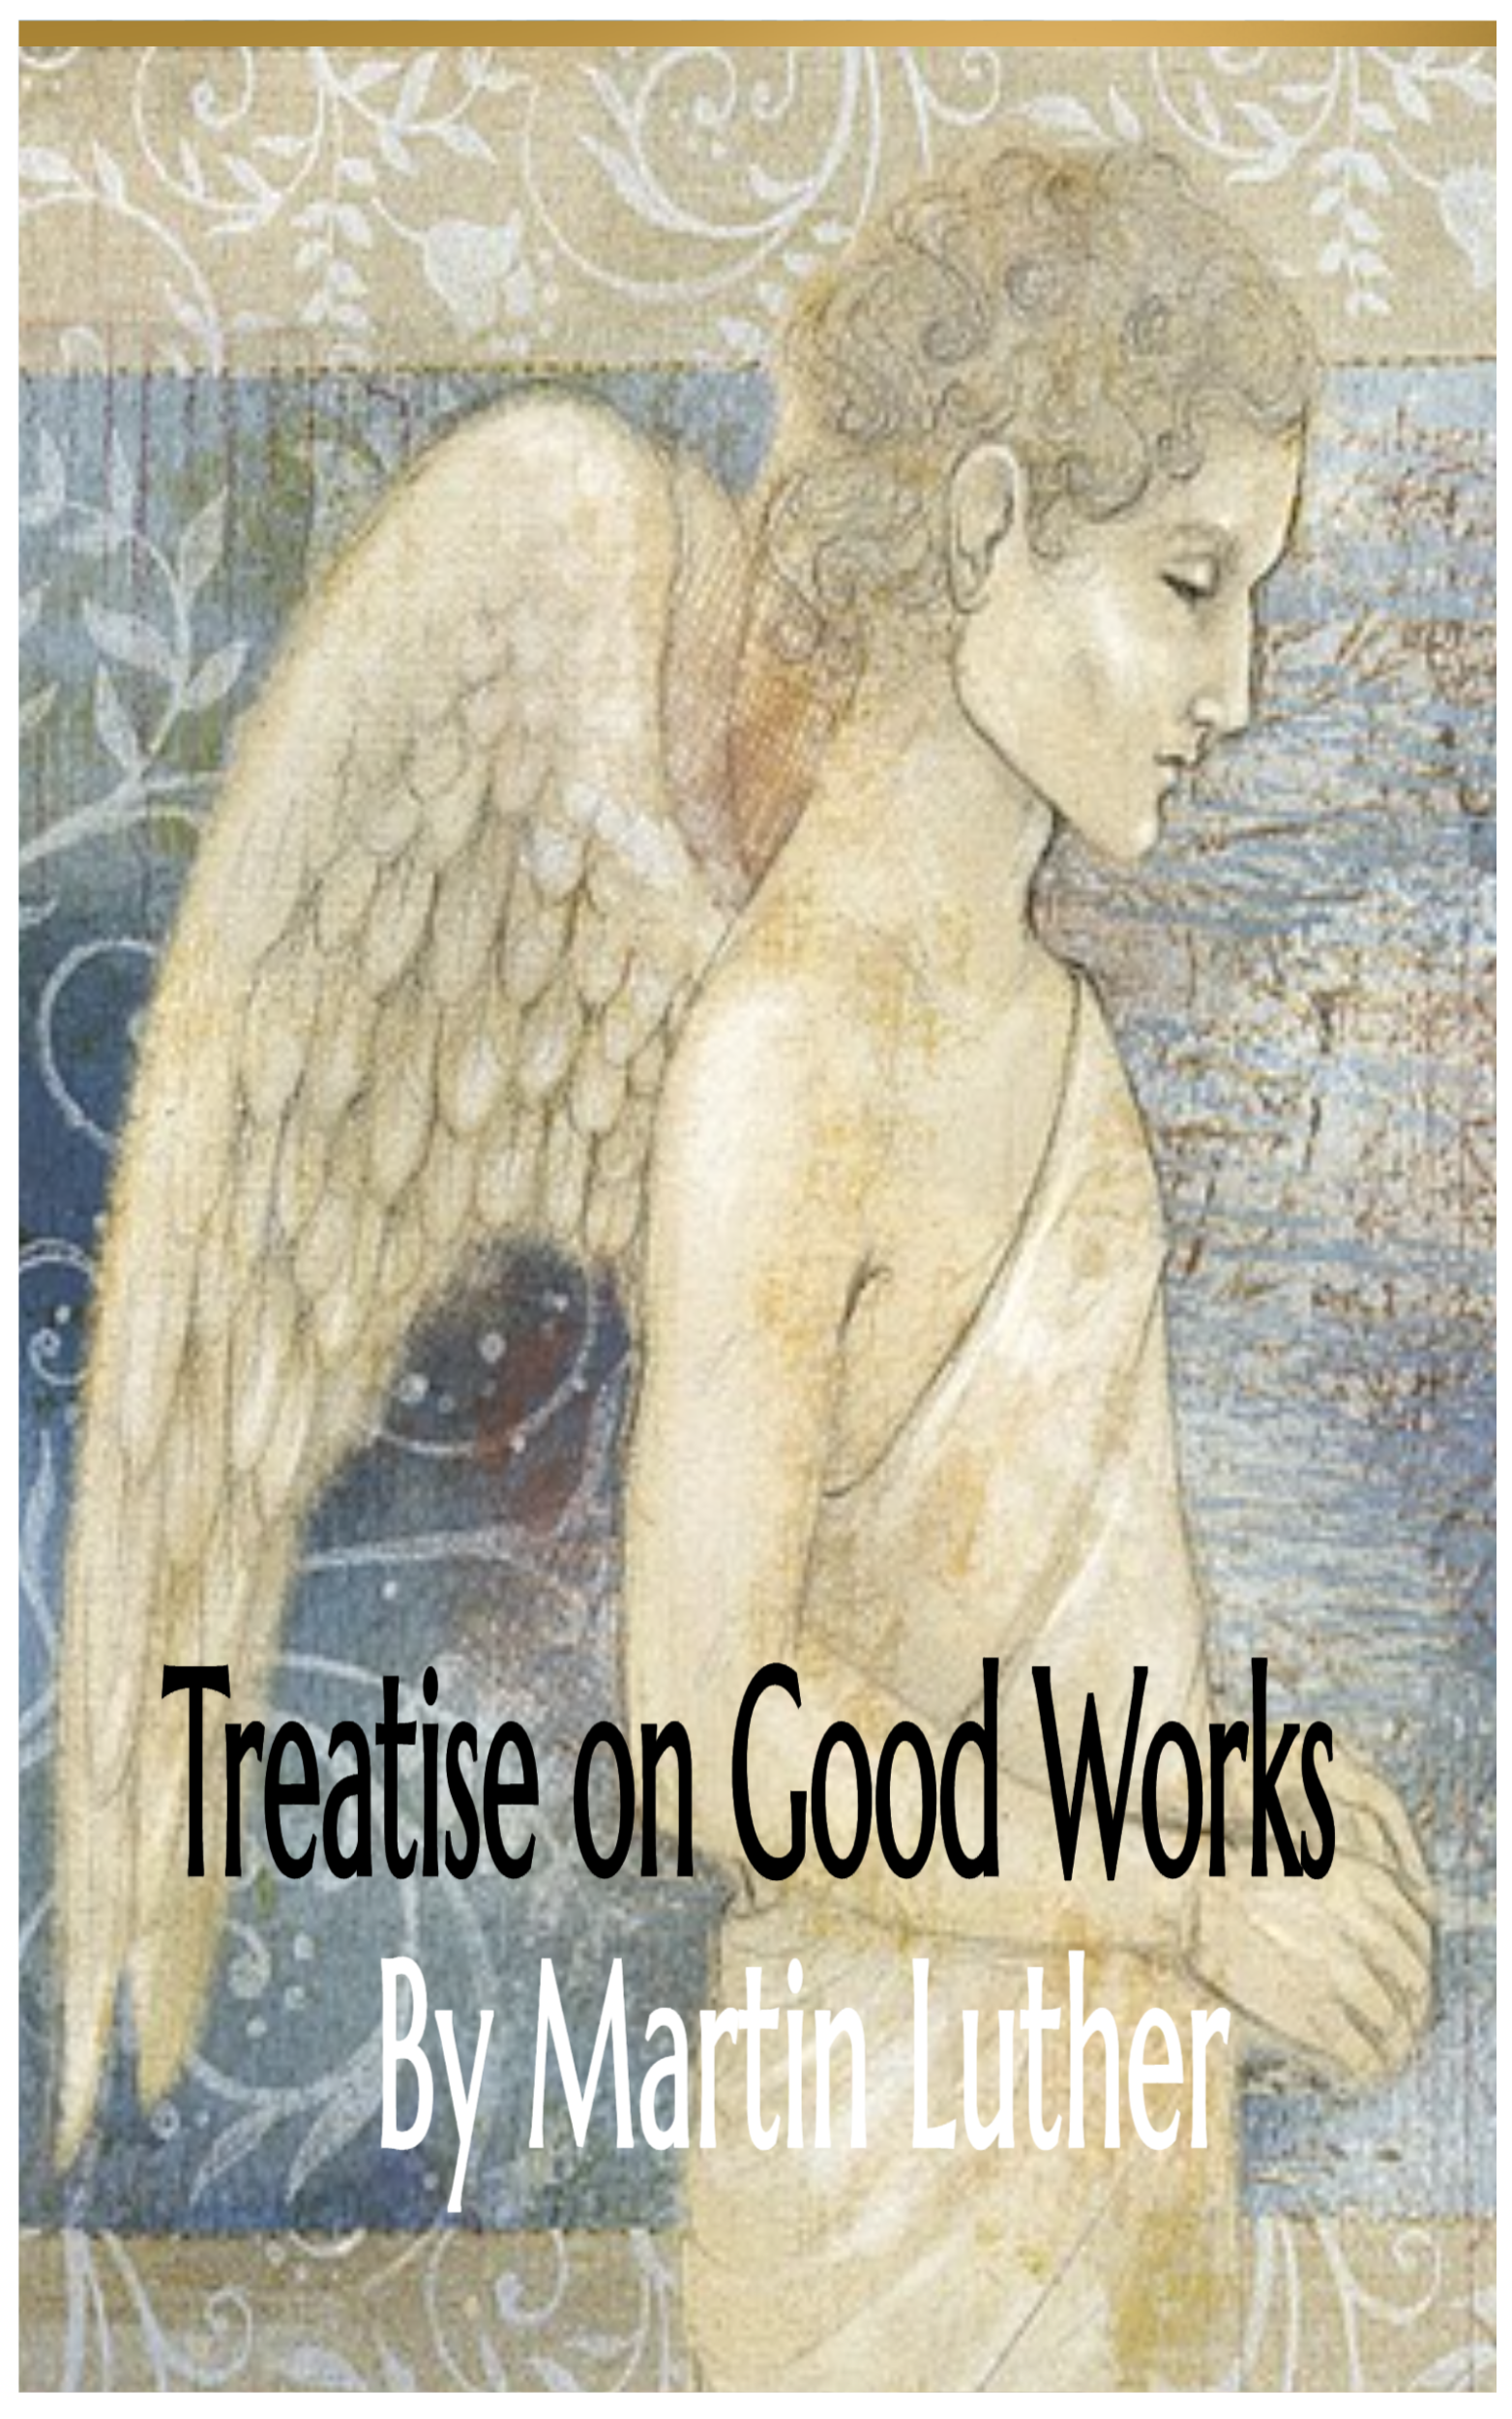 A Treatise on Good Works by Dr. Martin Luther, 1520